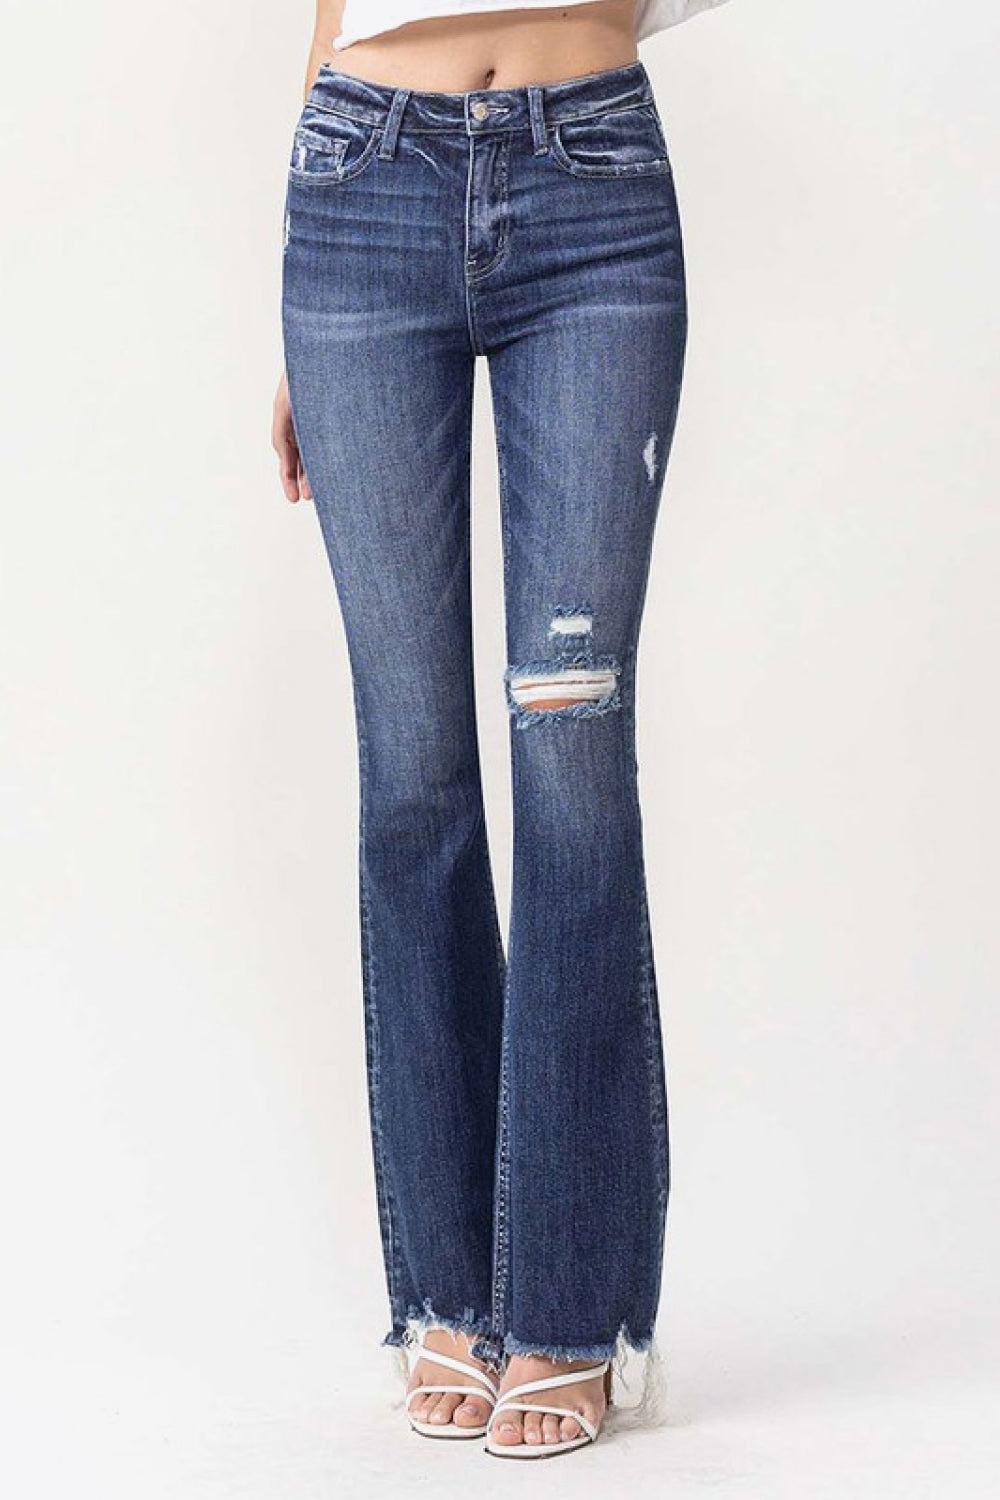 Vervet by Flying Monkey Luna Full Size High Rise Flare Jeans - Ships from The US